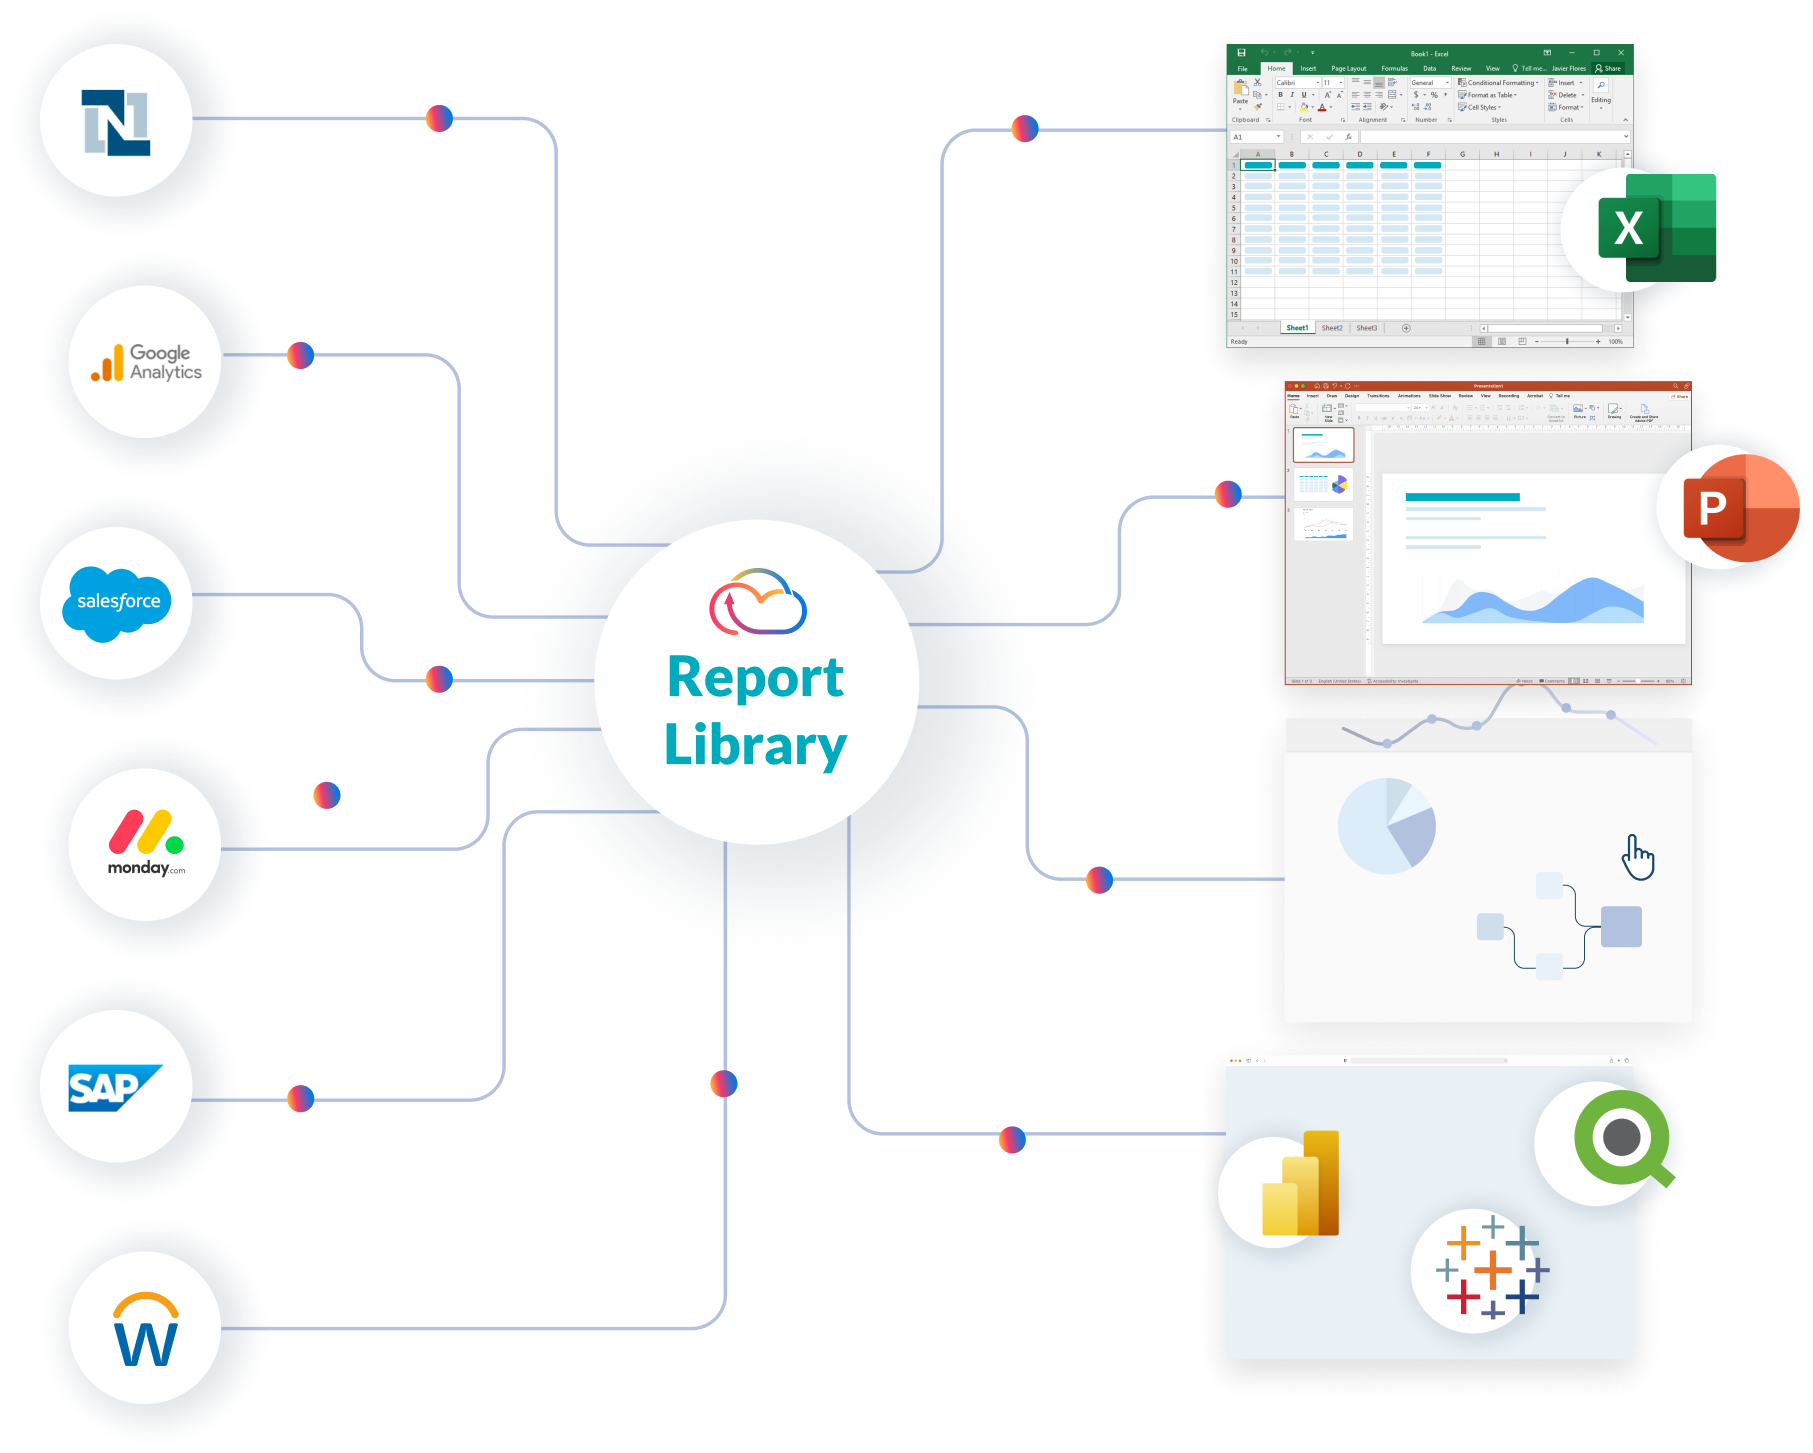 Save time with pre-built reports